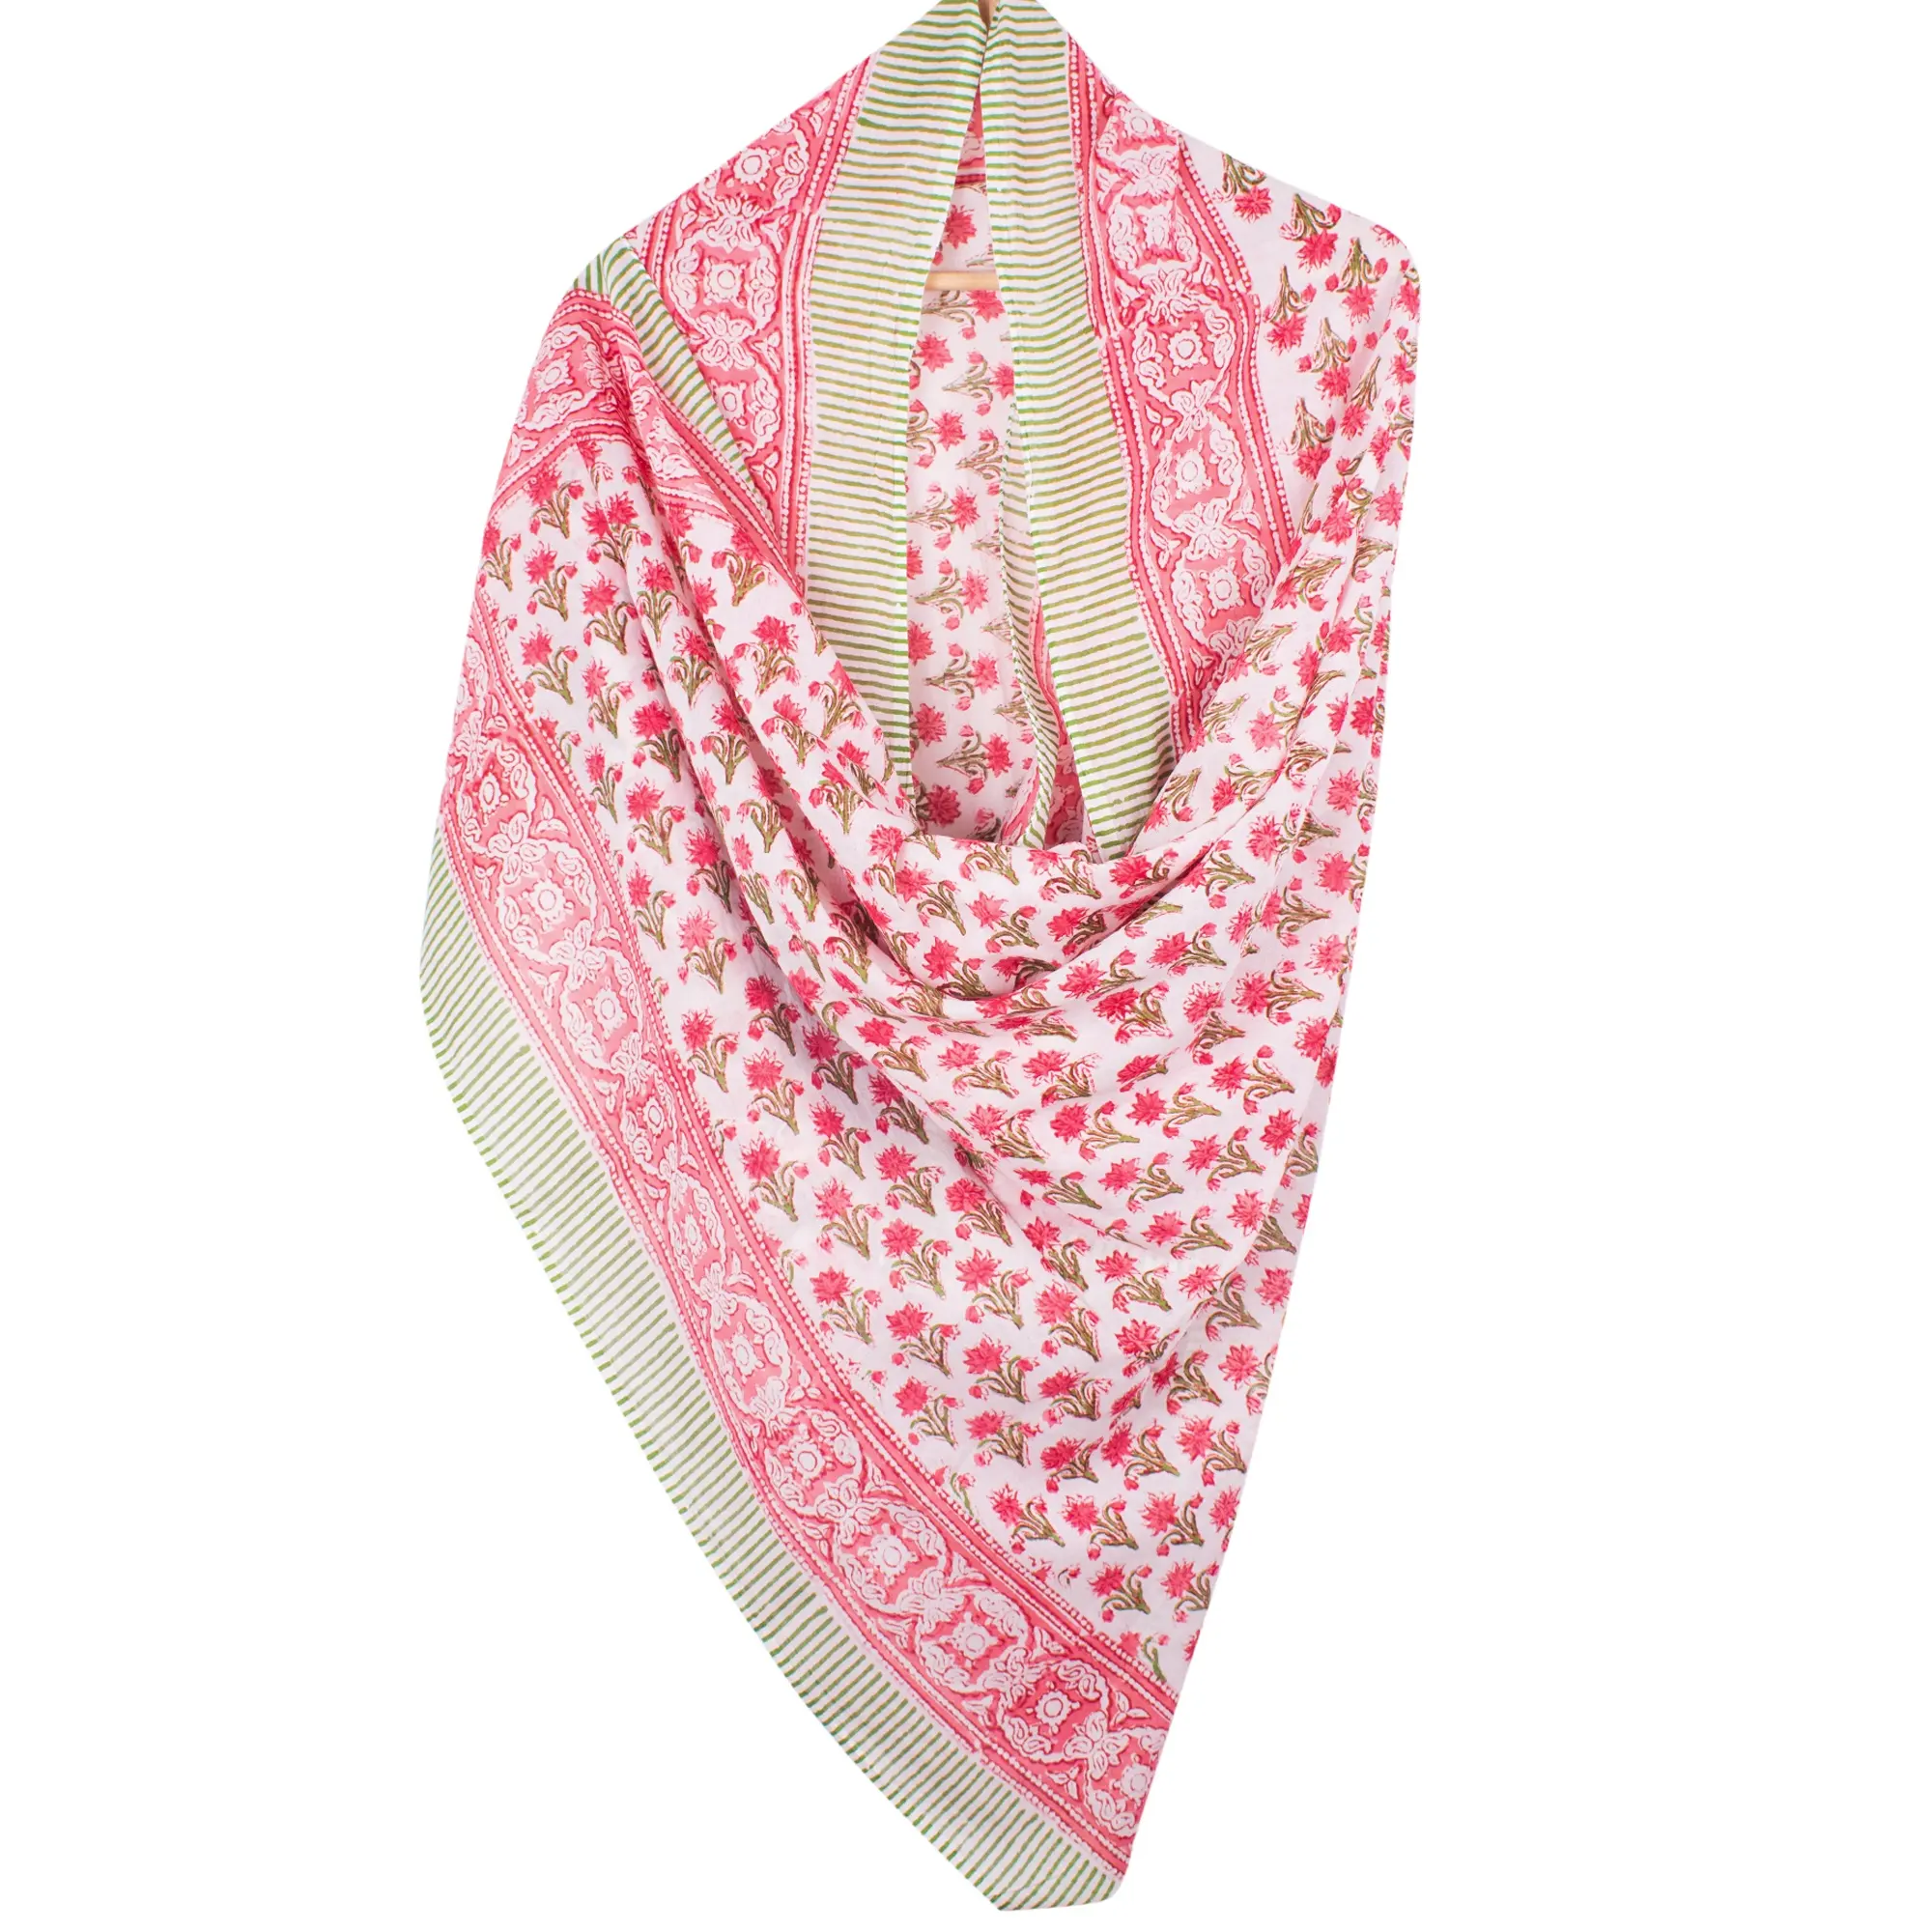 Indian Hand Block Print Natural Color Casual Wear shawls Cotton Durable Pareo Personalized Summer Hijab Scarf Wholesale